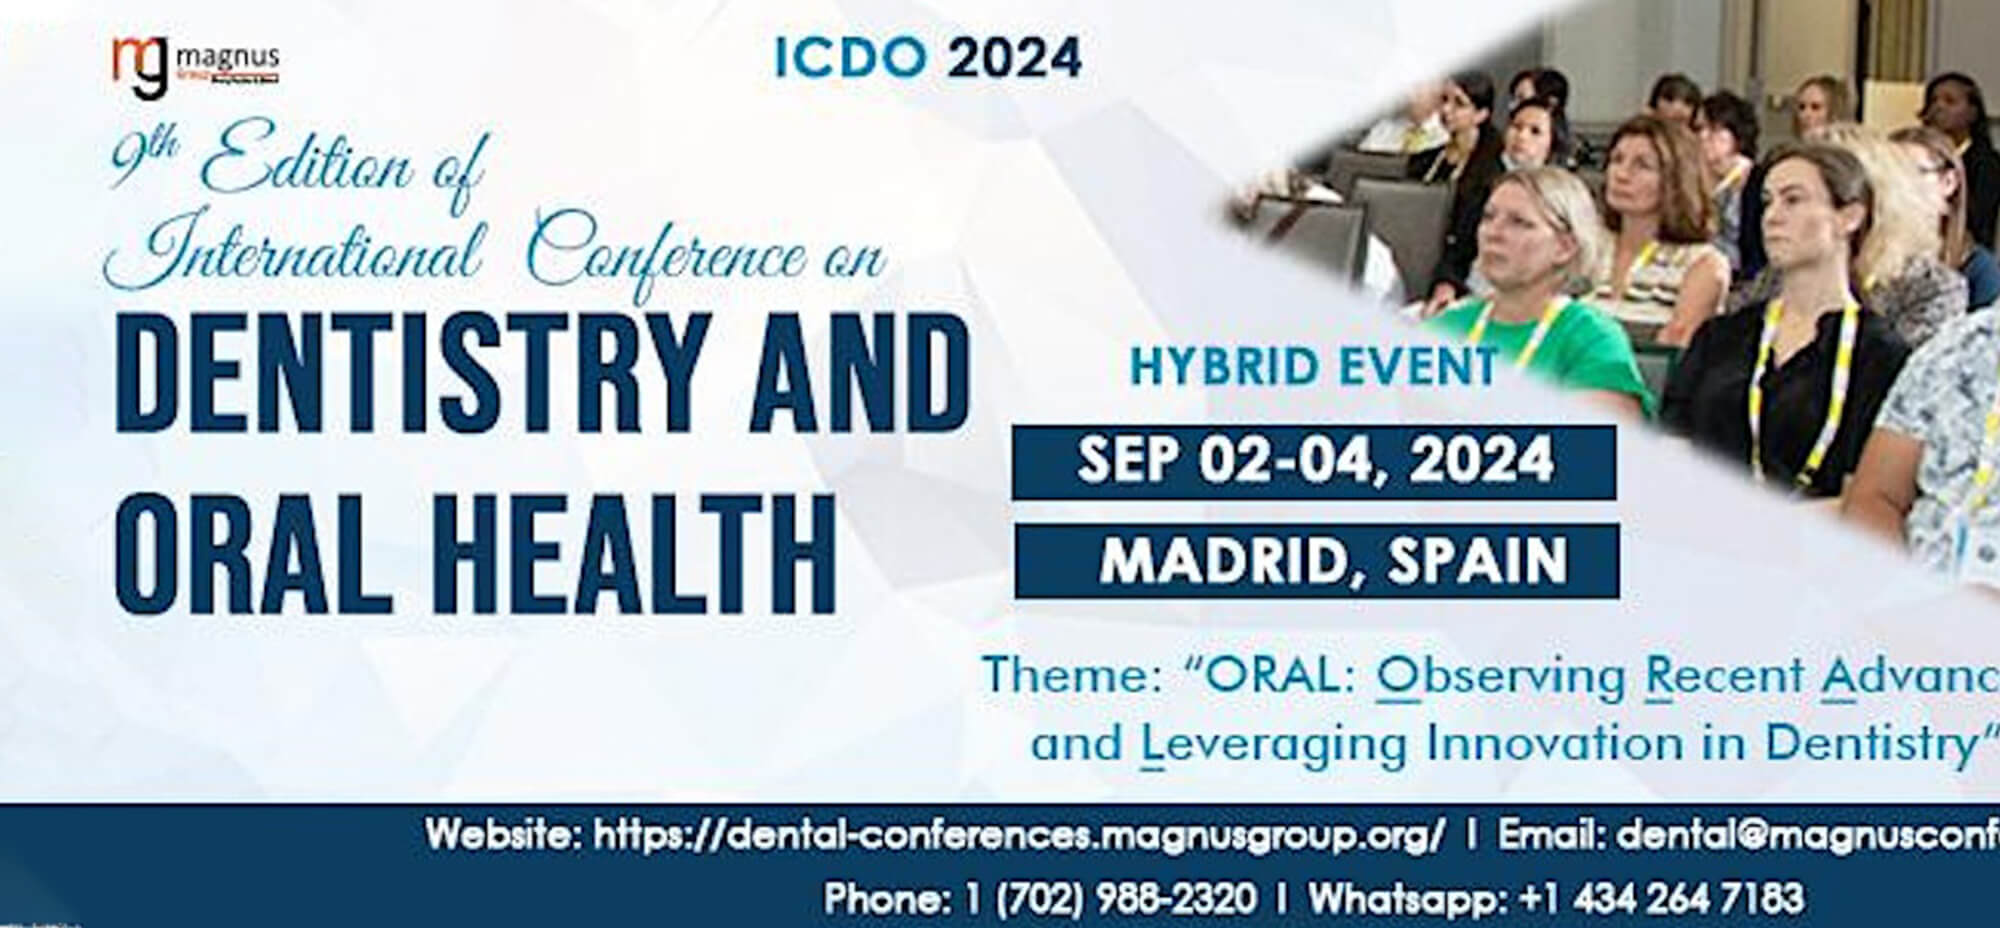 9th Edition of International Conference on Dentistry and Oral Health (ICDO)